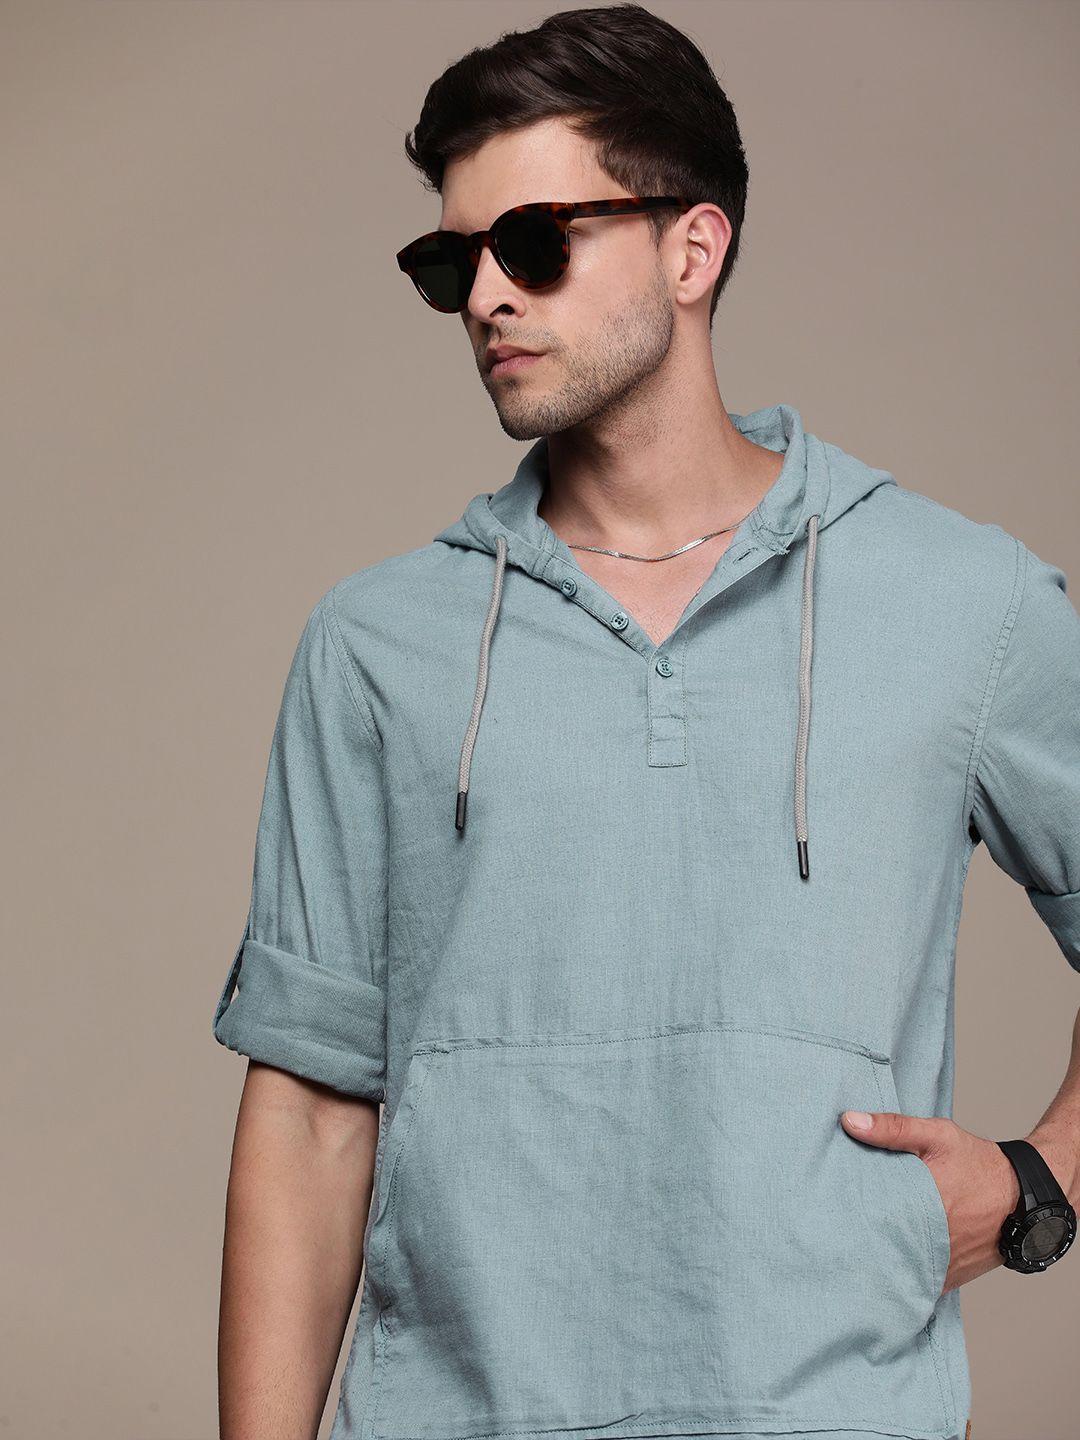 the roadster lifestyle co. linen cotton hooded casual shirt